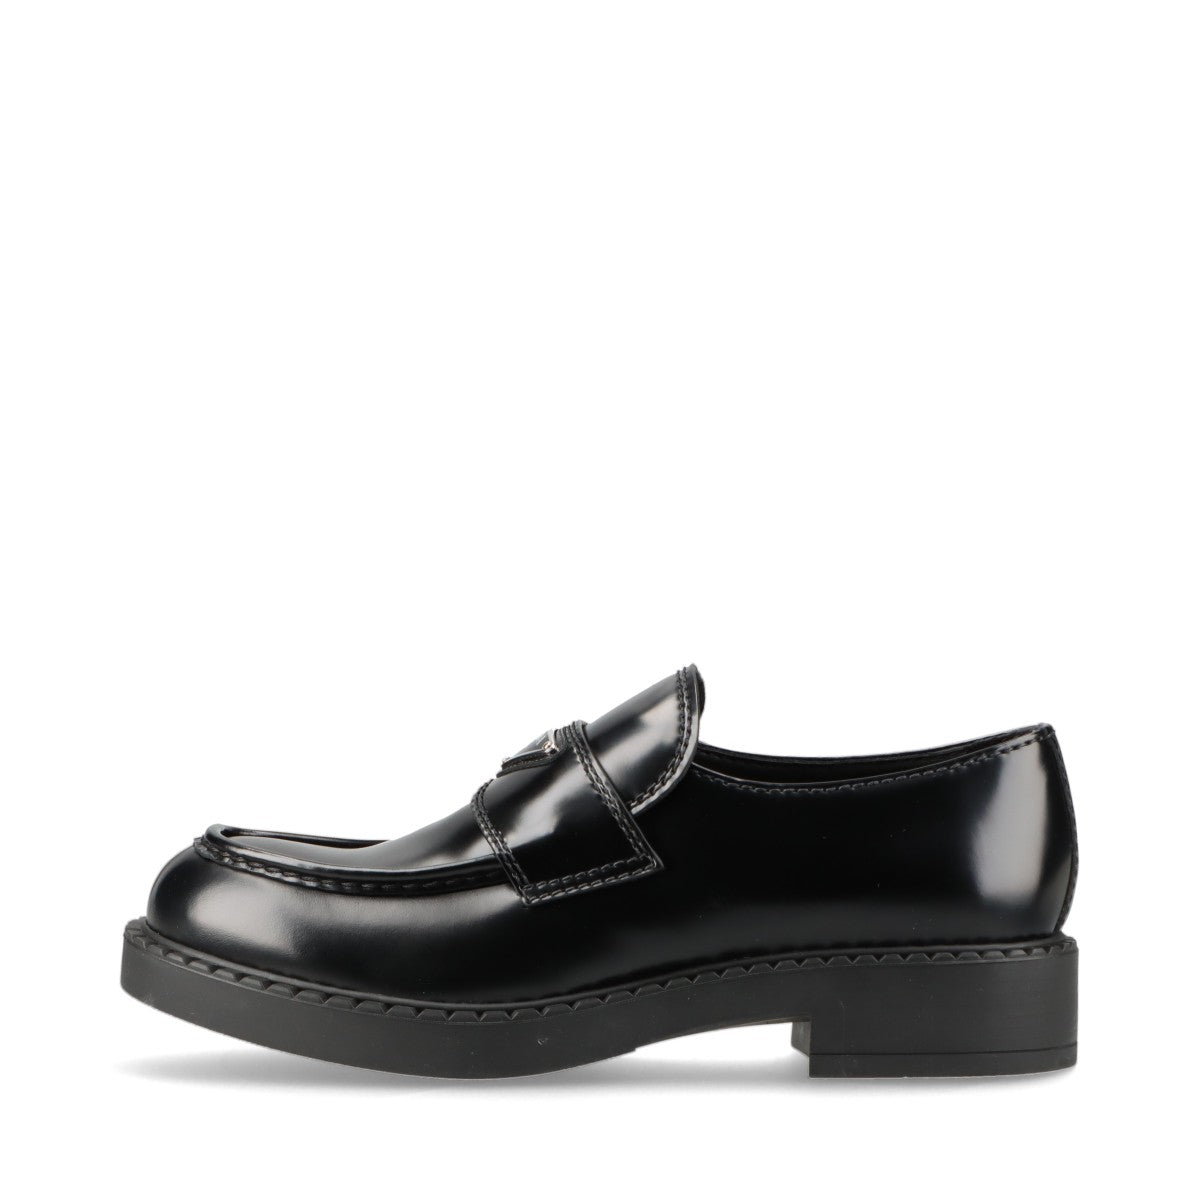 Prada Chocolate Leather Loafer US8 Men's Black Triangle logo 2DE127 Box There is a bag